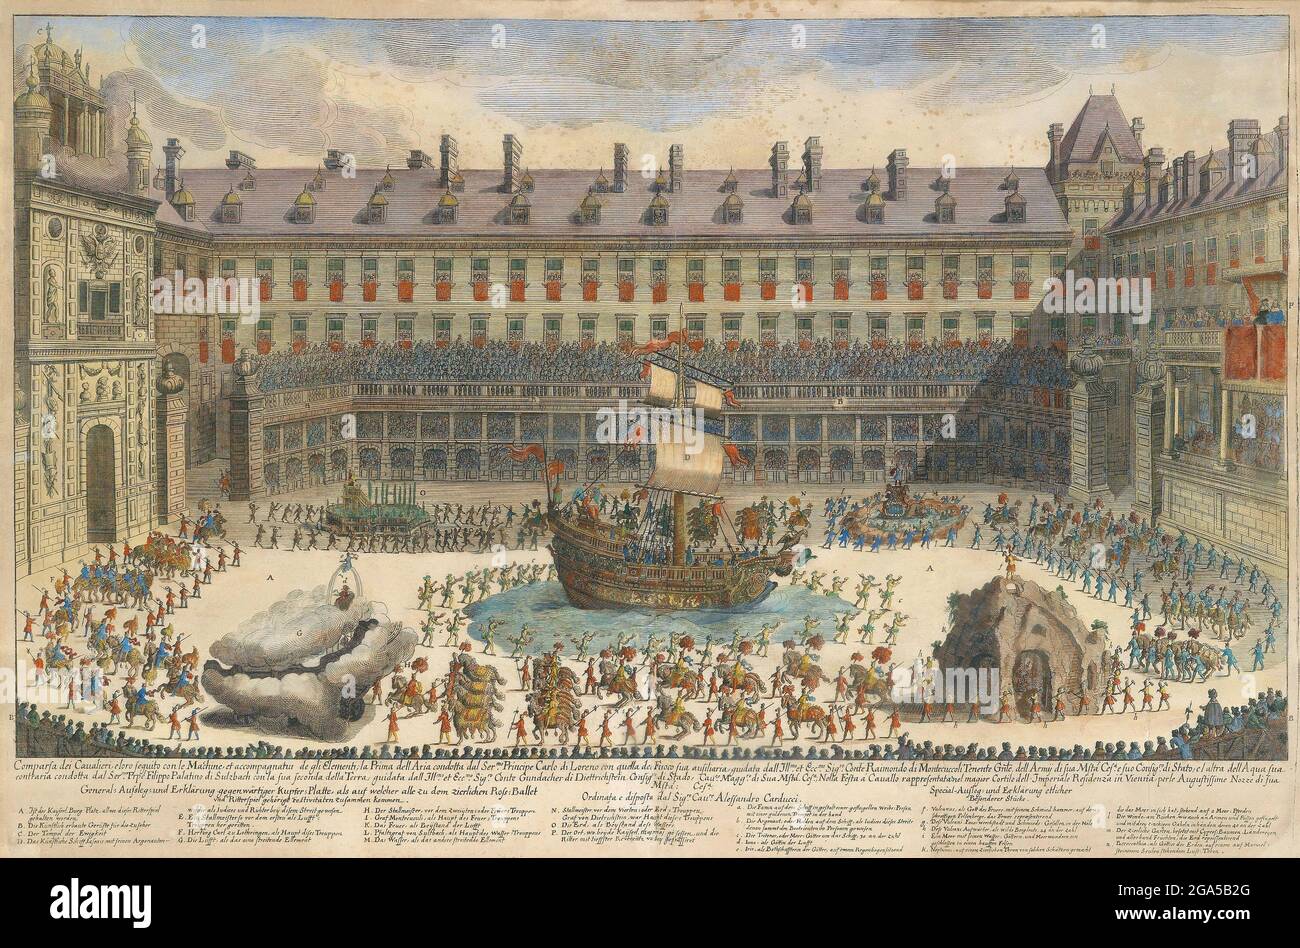 Germany: 'Court Performance and Festive Parade in Honour of the Wedding of Emperor Leopold I with Margaret Theresa of Spain in December 1666', illustration by Francesco Sbarra (1611-1668), c. 1667, Florence. Leopold I (1640-1705) was the second son of Emperor Ferdinand III, and became heir apparent after the death of his older brother, Ferdinand IV. He was elected Holy Roman Emperor in 1658 after his father's death, and by then had also already become Archduke of Austria and claimed the crowns of Germany, Croatia, Bohemia and Hungary. Stock Photo